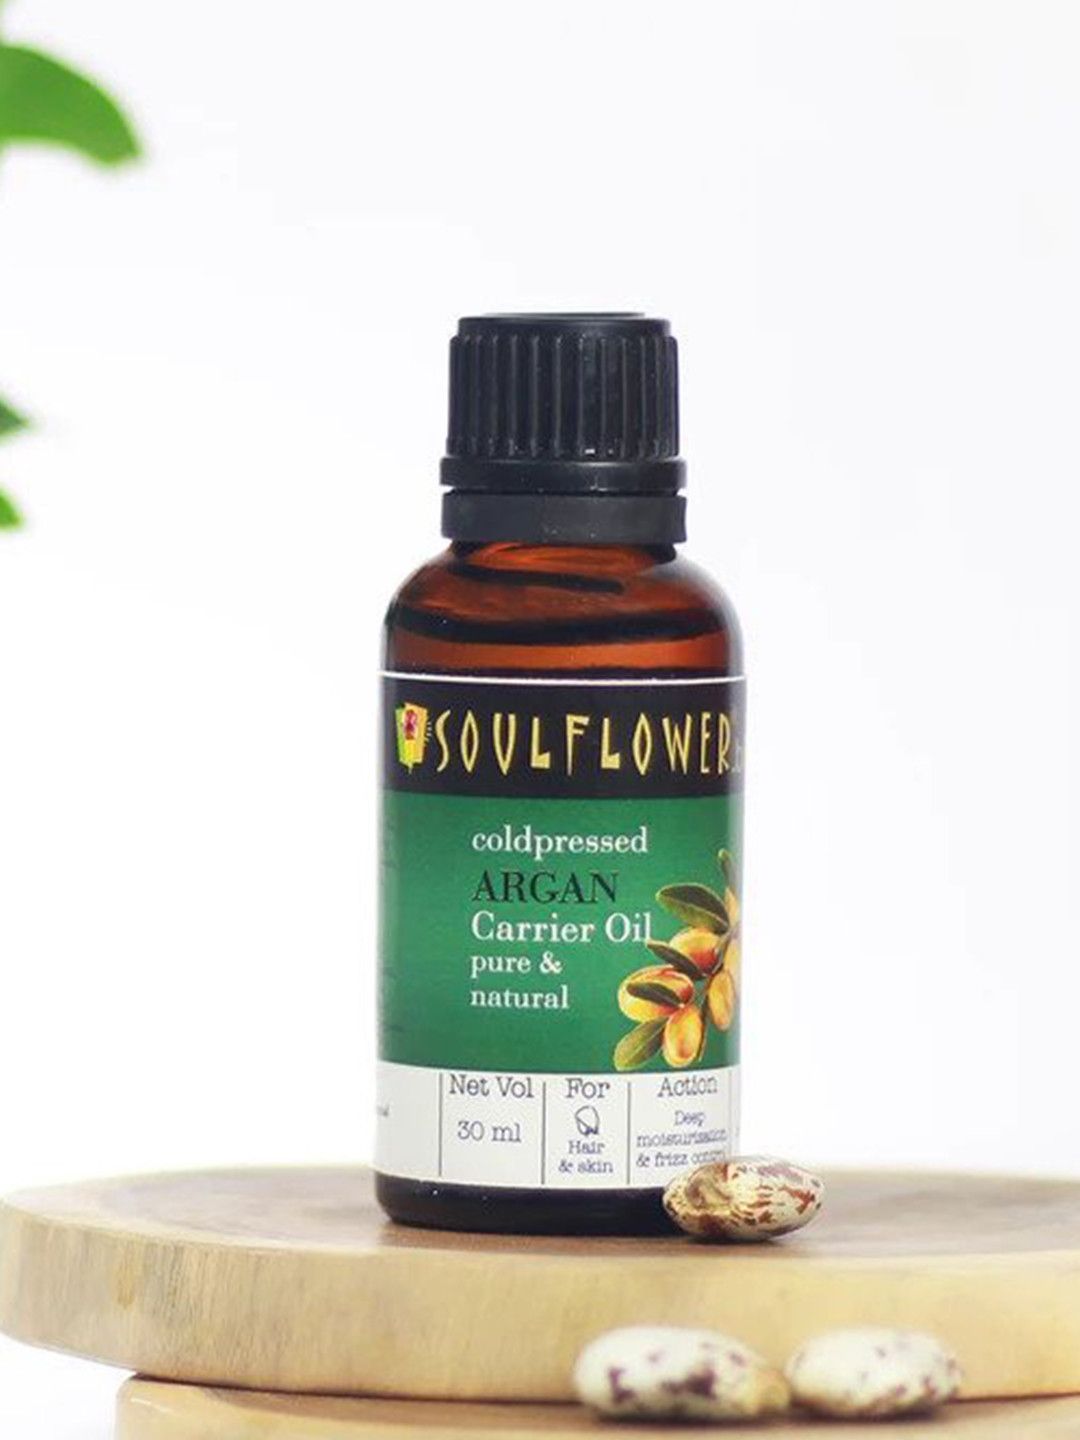 Soulflower Argan Hair Oil - Skin Hair Nails Moisturize Hydrate Natural Coldpressed 30 ml Price in India